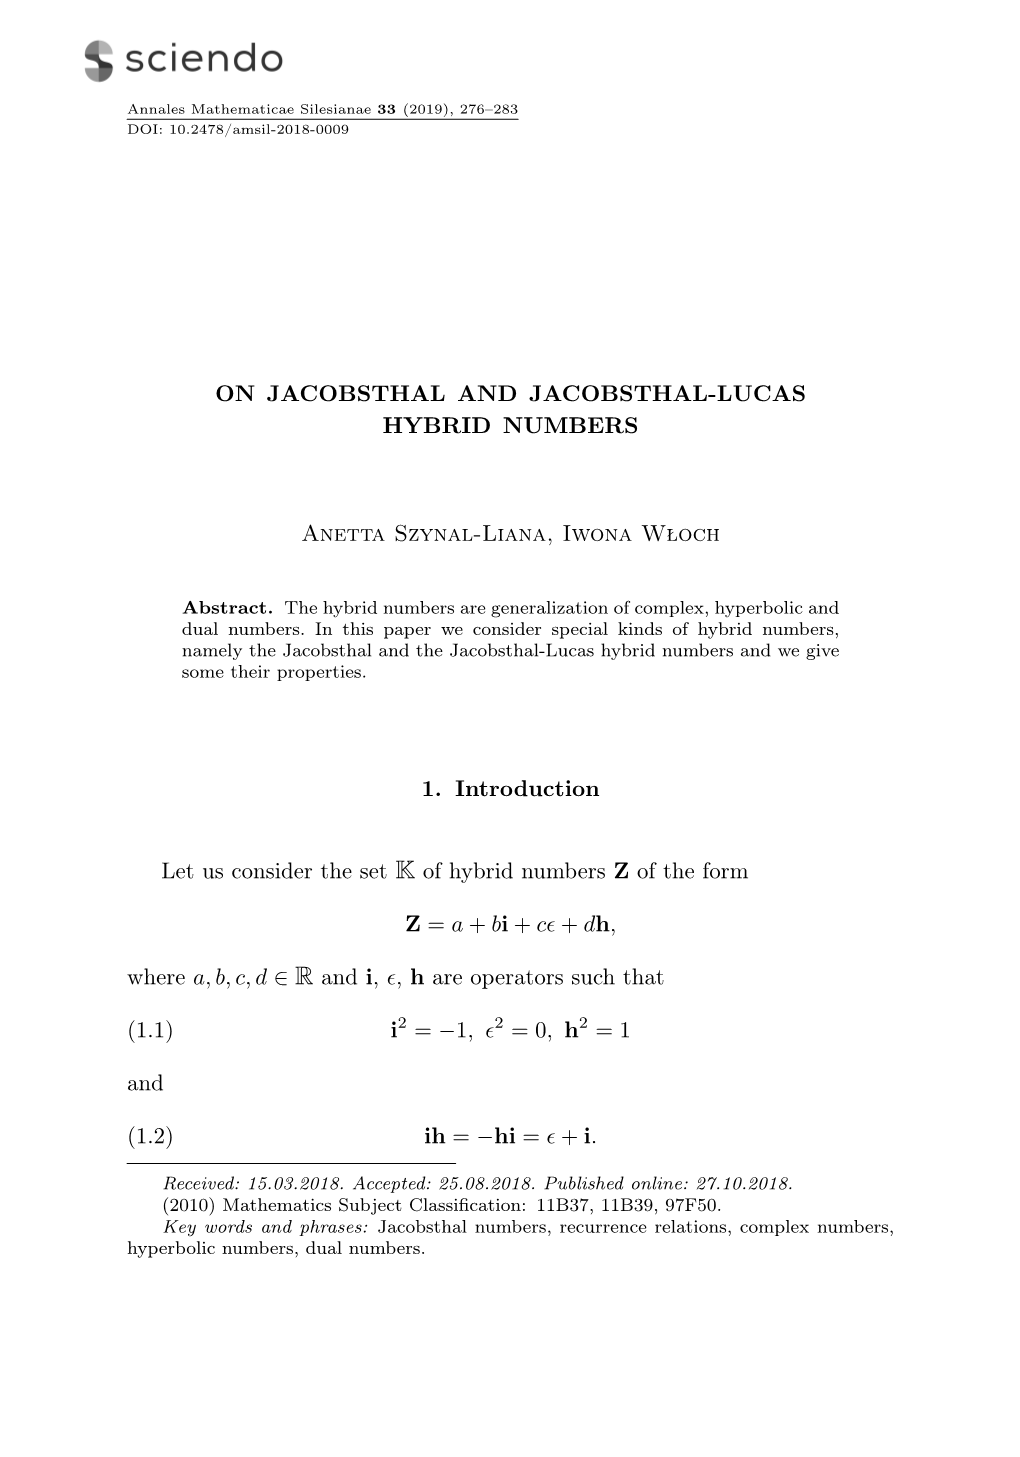 On Jacobsthal and Jacobsthal-Lucas Hybrid Numbers